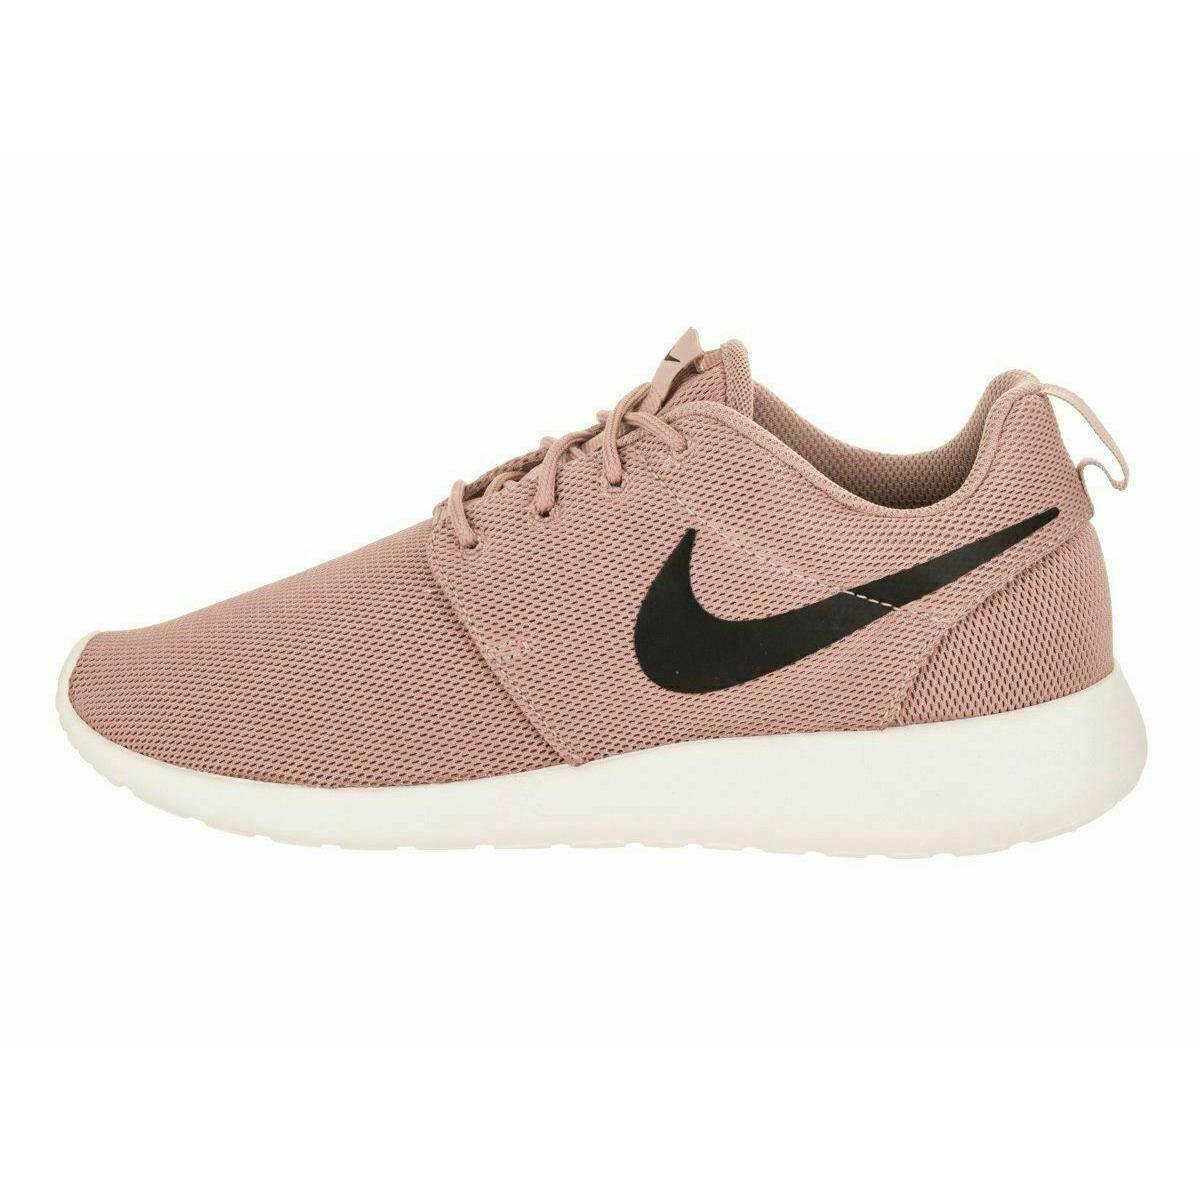 Nike shoes Roshe One - Brown & White 0